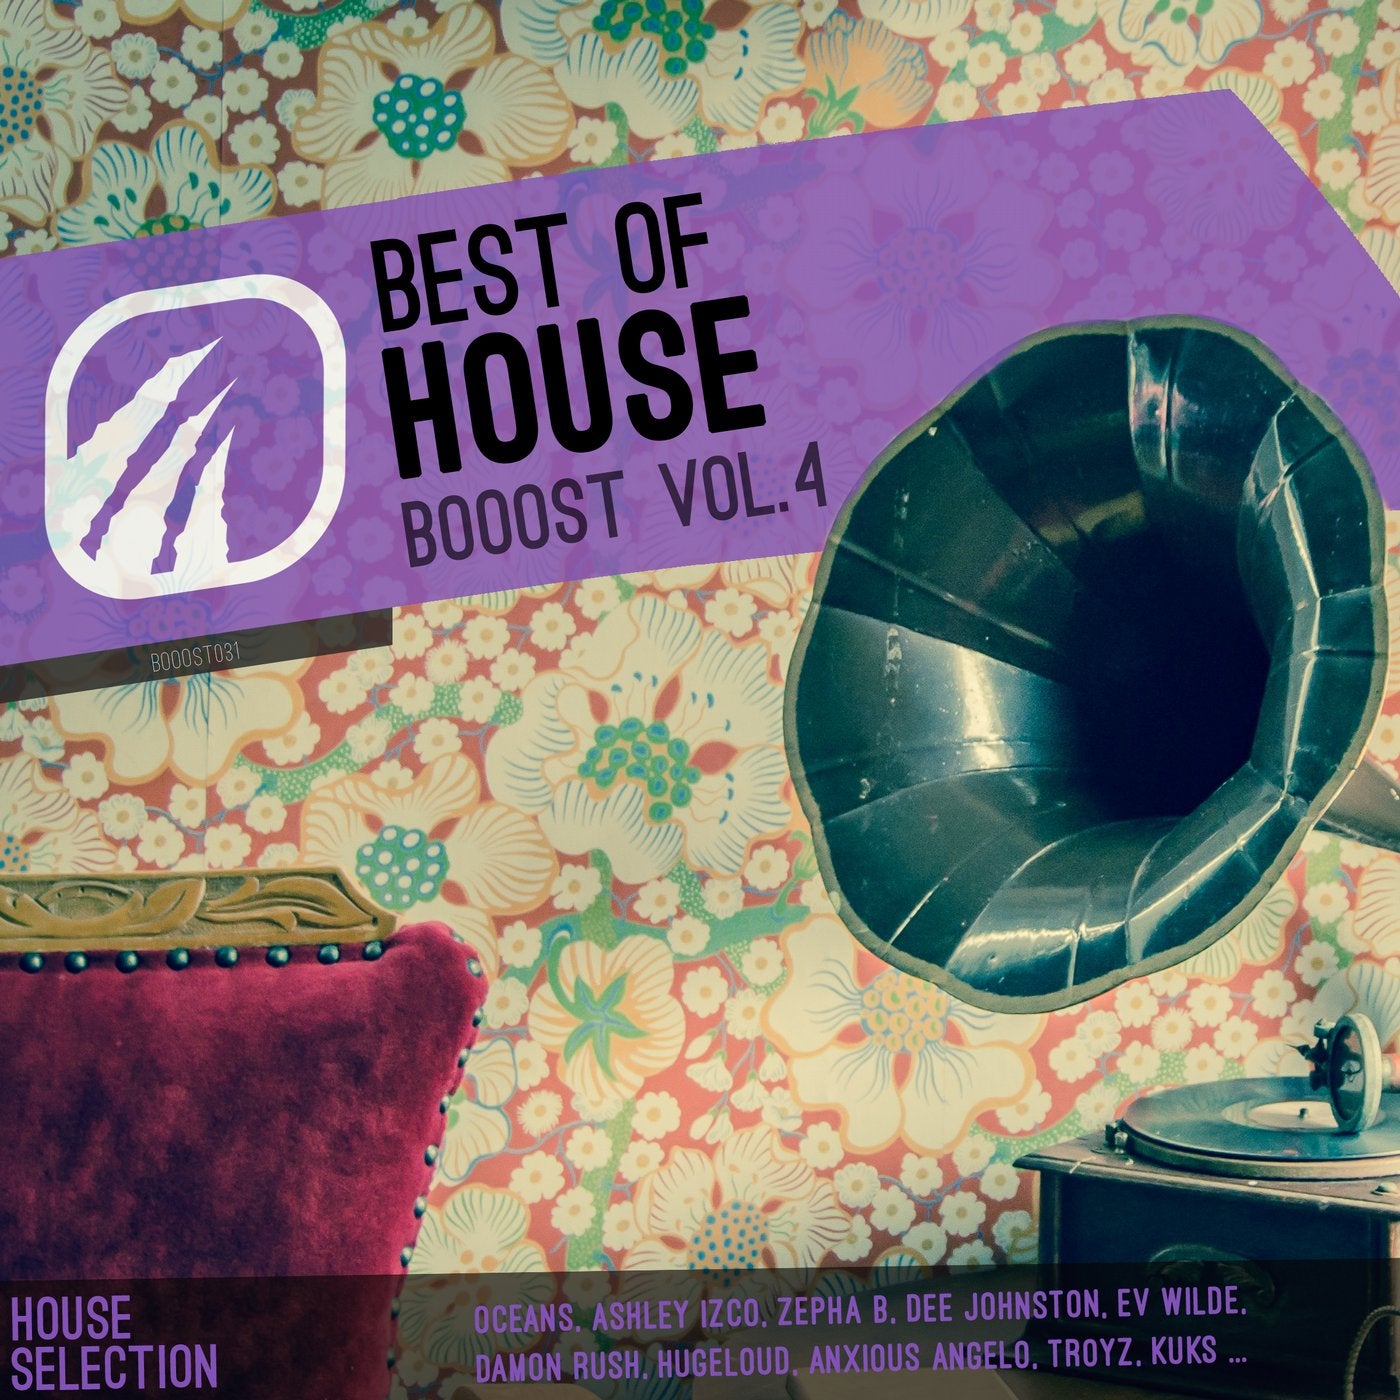 Best of House Booost Vol.4